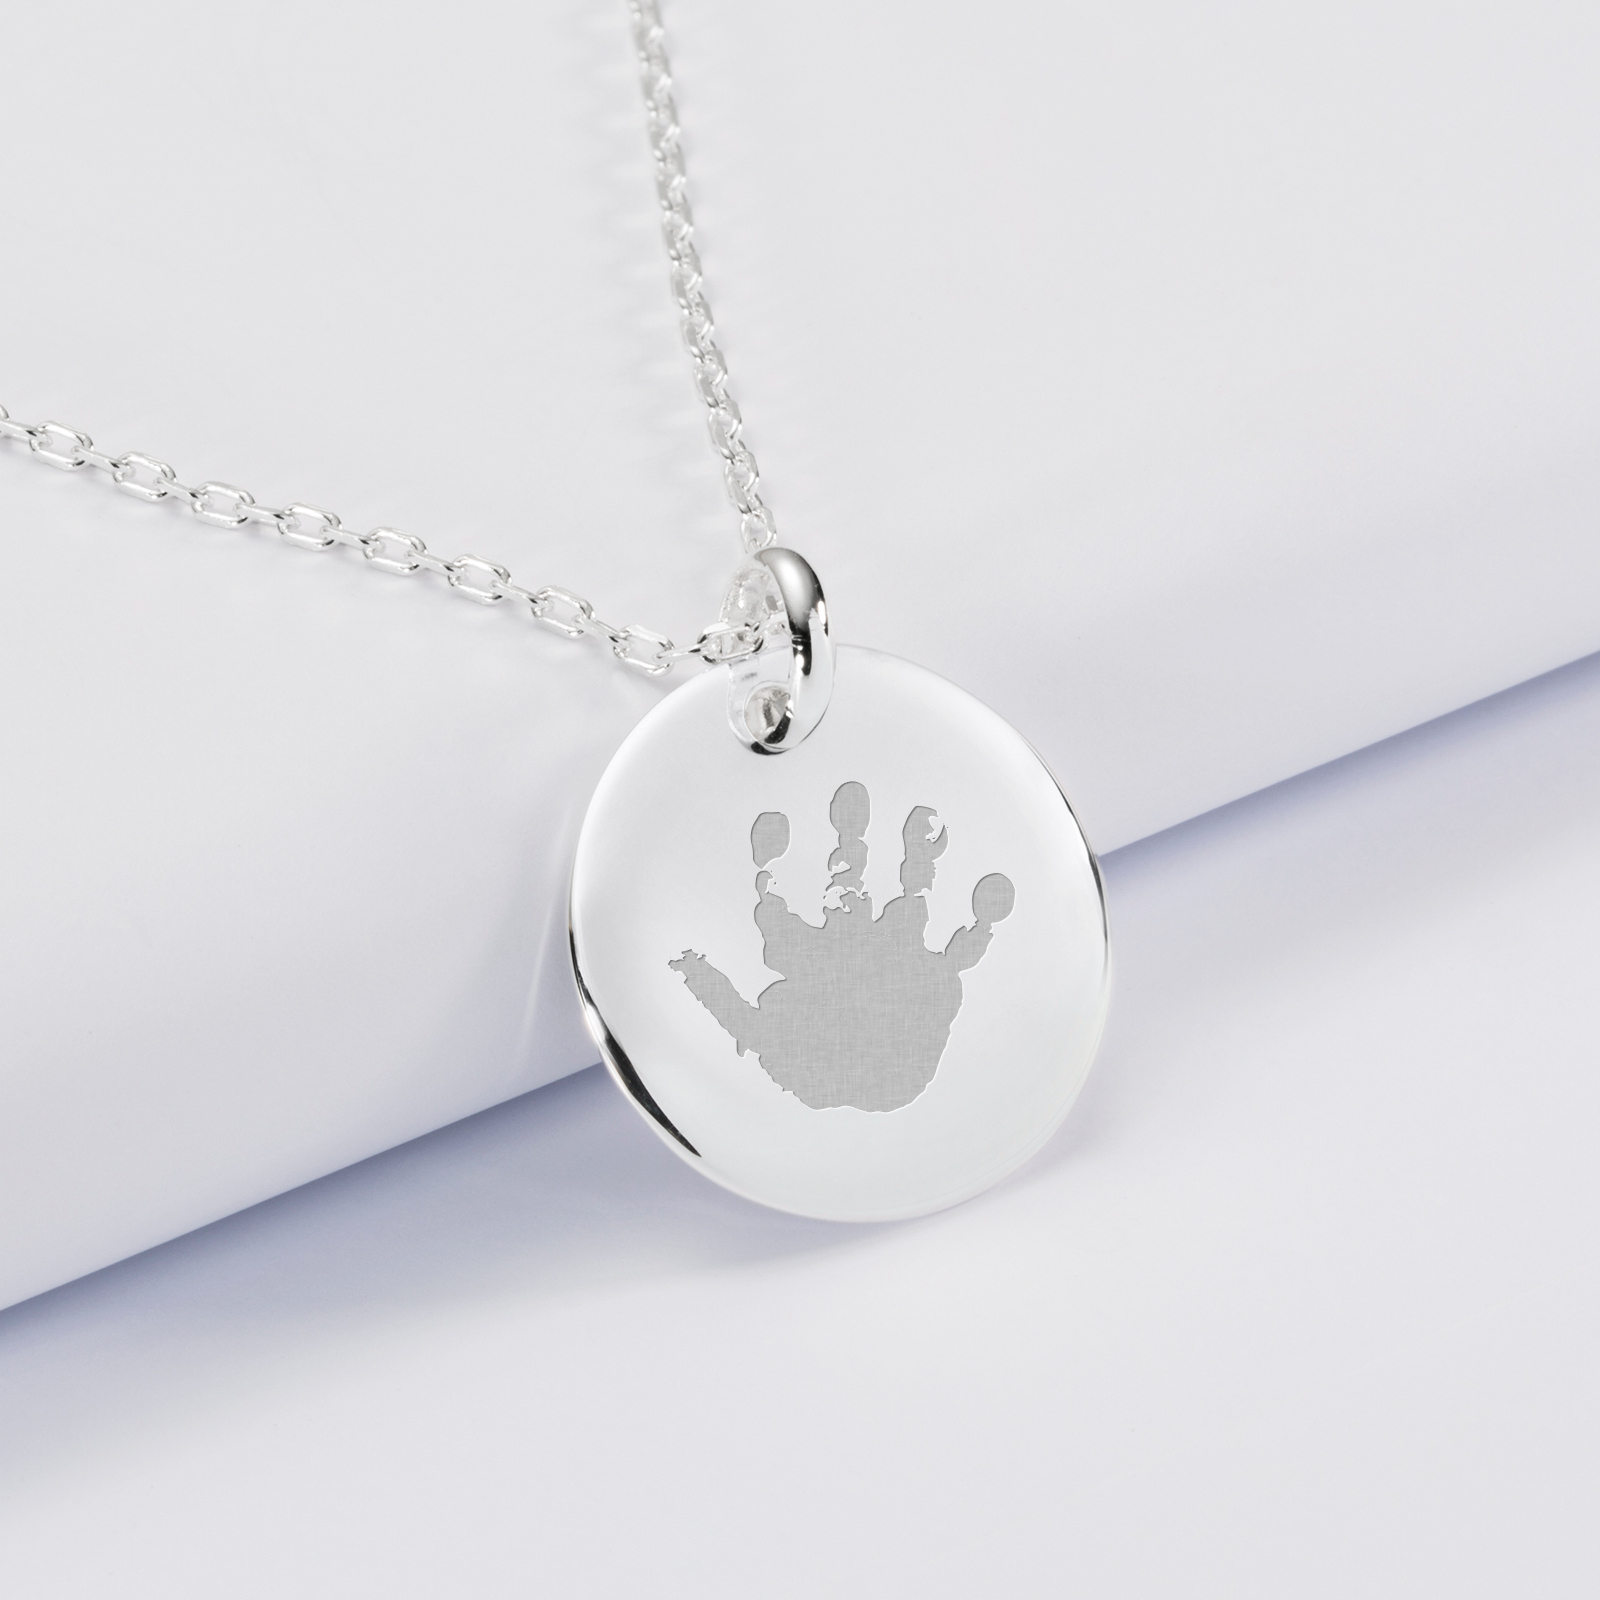 Personalised engraved rounded silver medallion pendant 20 mm - imprint